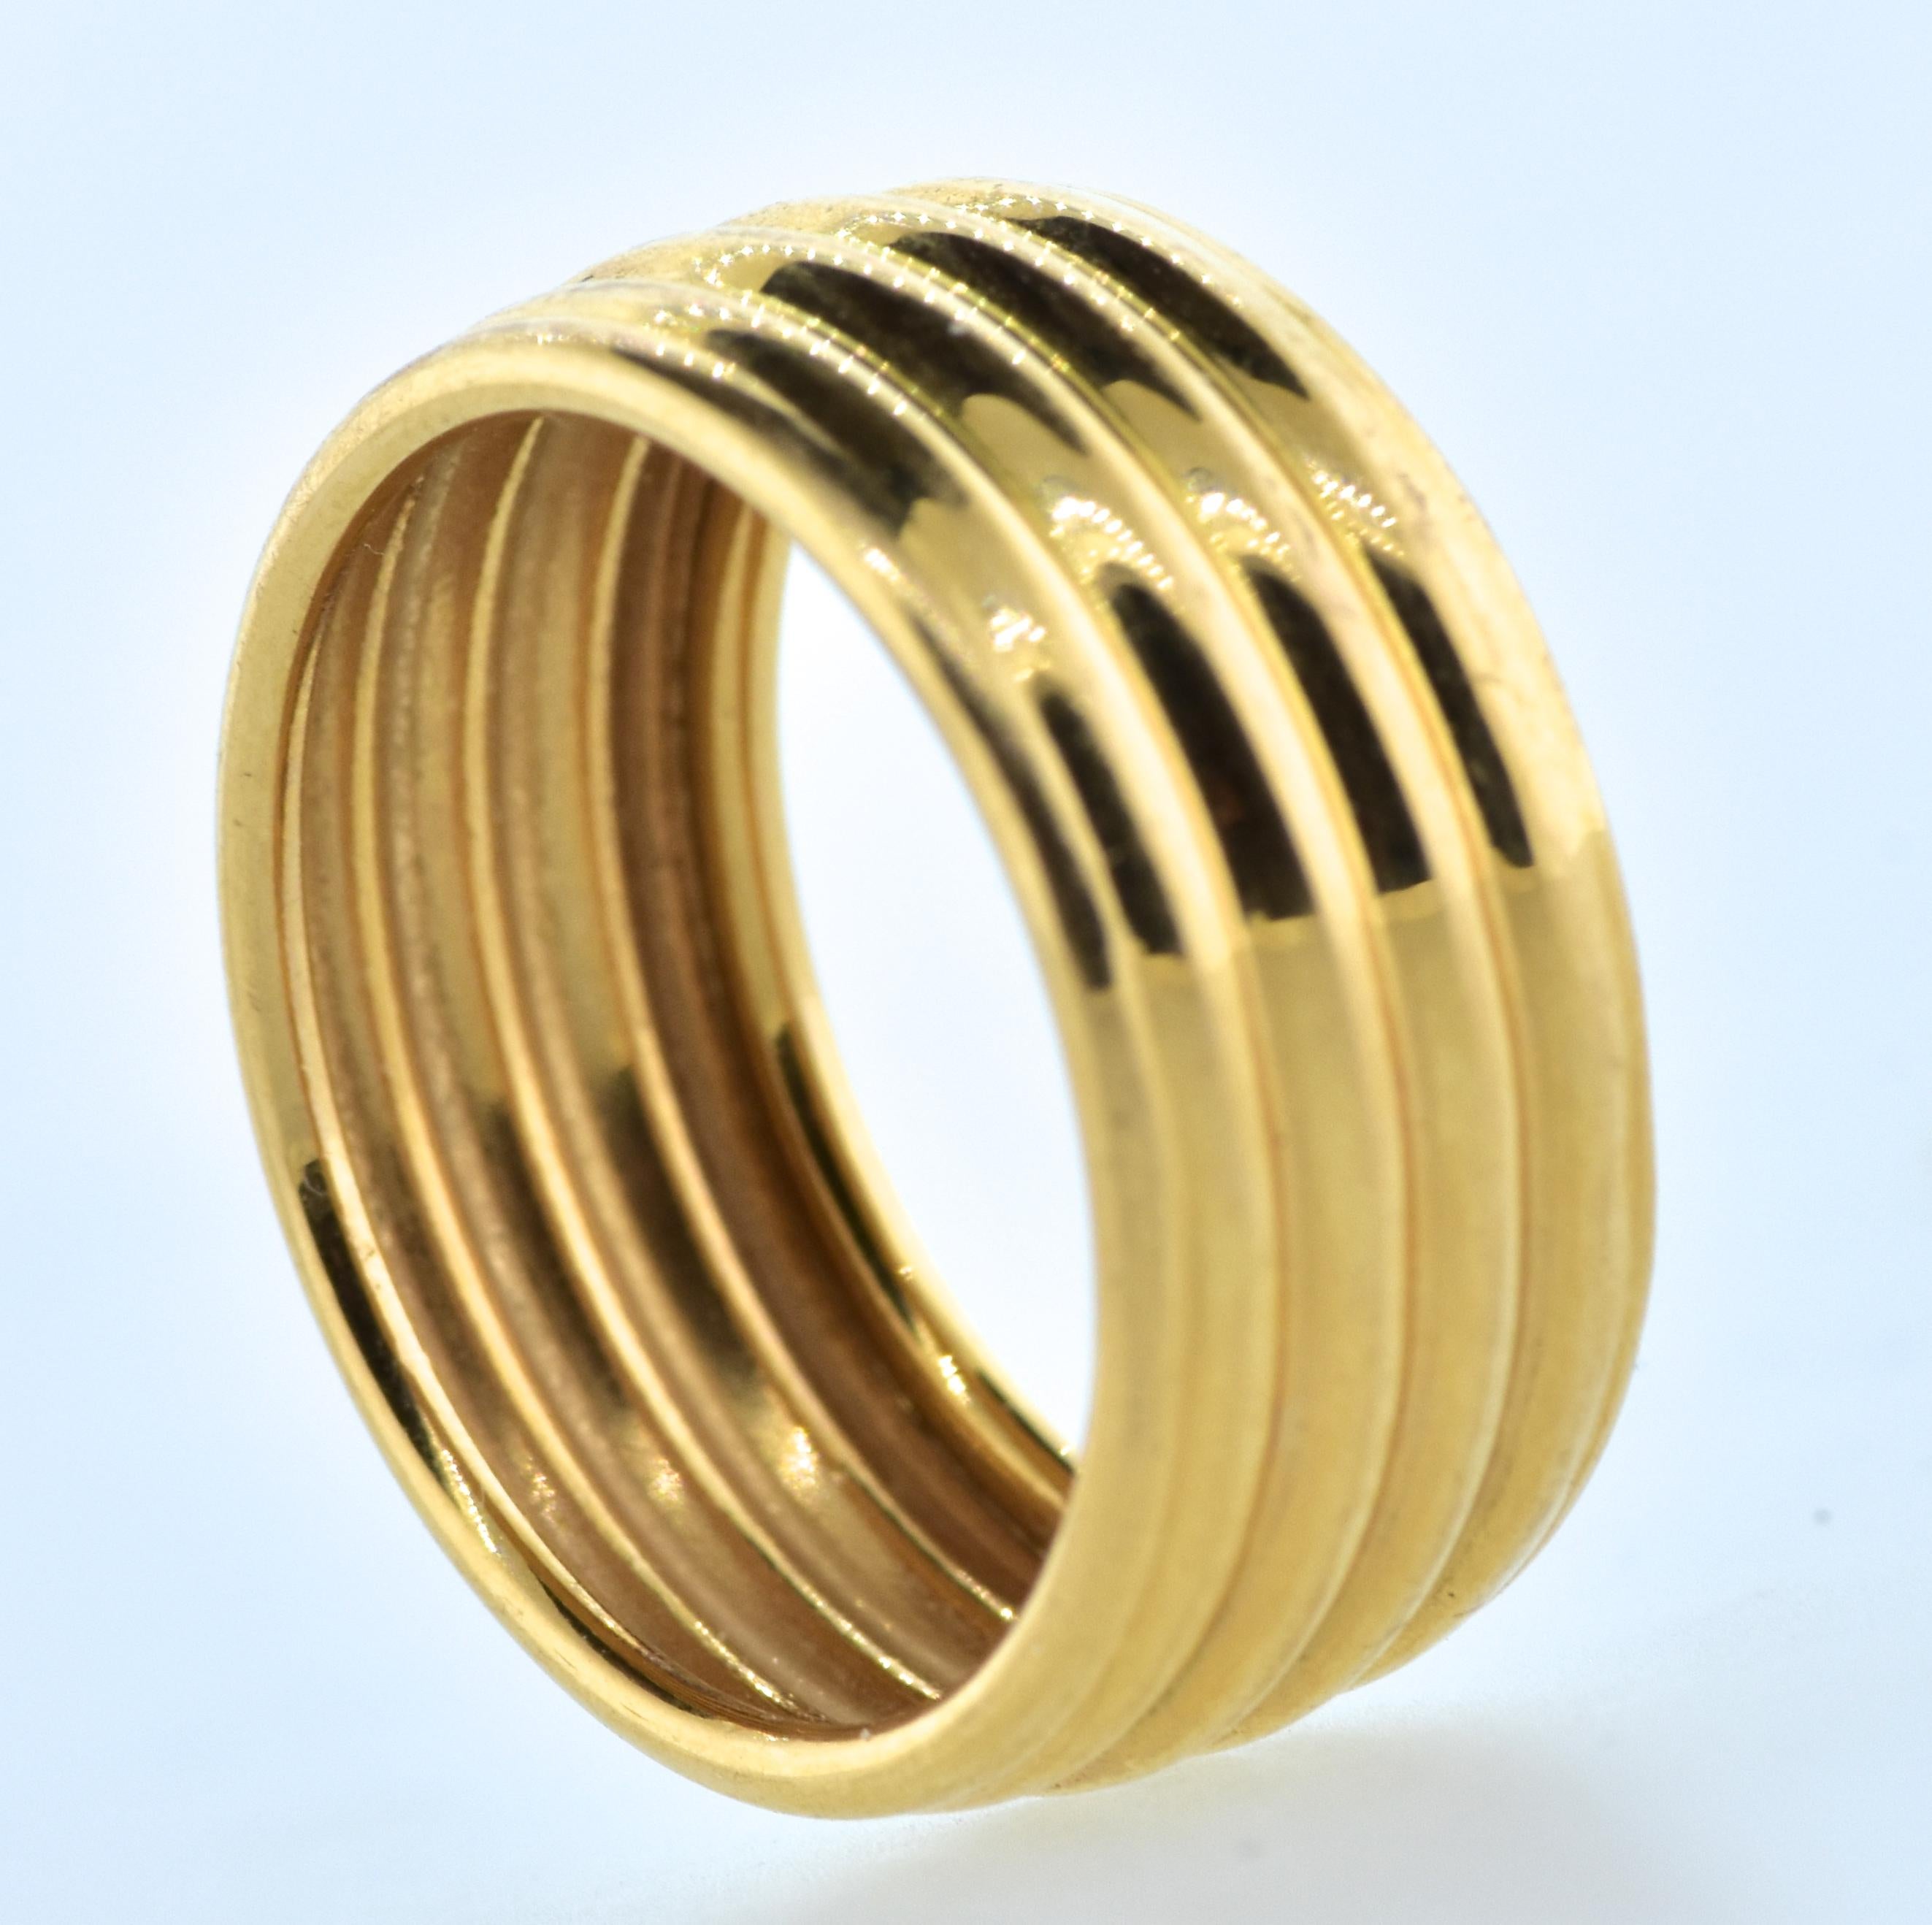 18K wide gold 4-tier band, unusual in design. This wide gold band weighs 2.12 grams and is a size 4.8 and can be sized easily.  A classic and bold statement for the hand, this ring is well made and in fine condition.